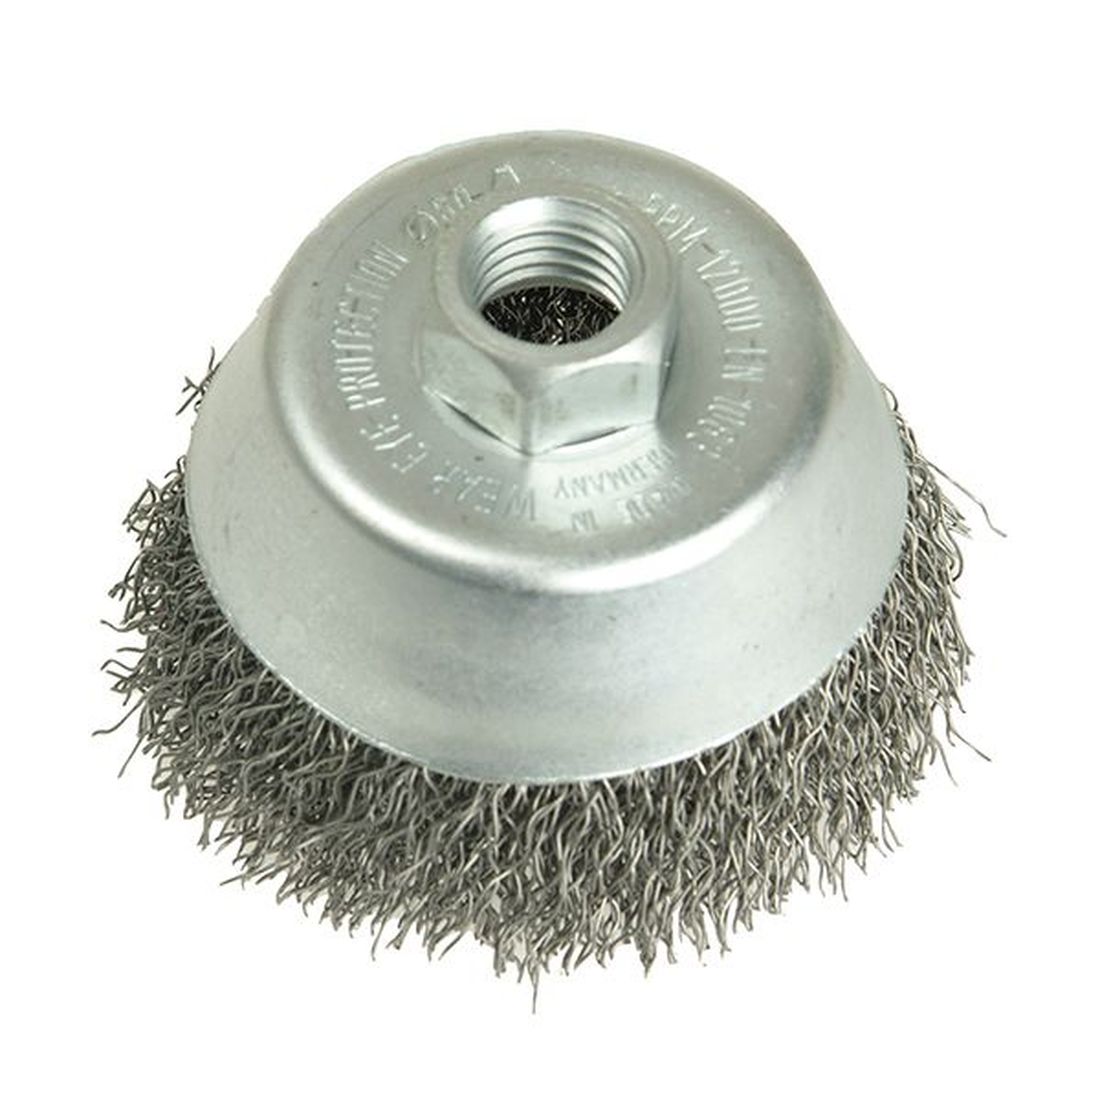 Lessmann Cup Brush 80mm M14, 0.30 Stainless Steel Wire                                   